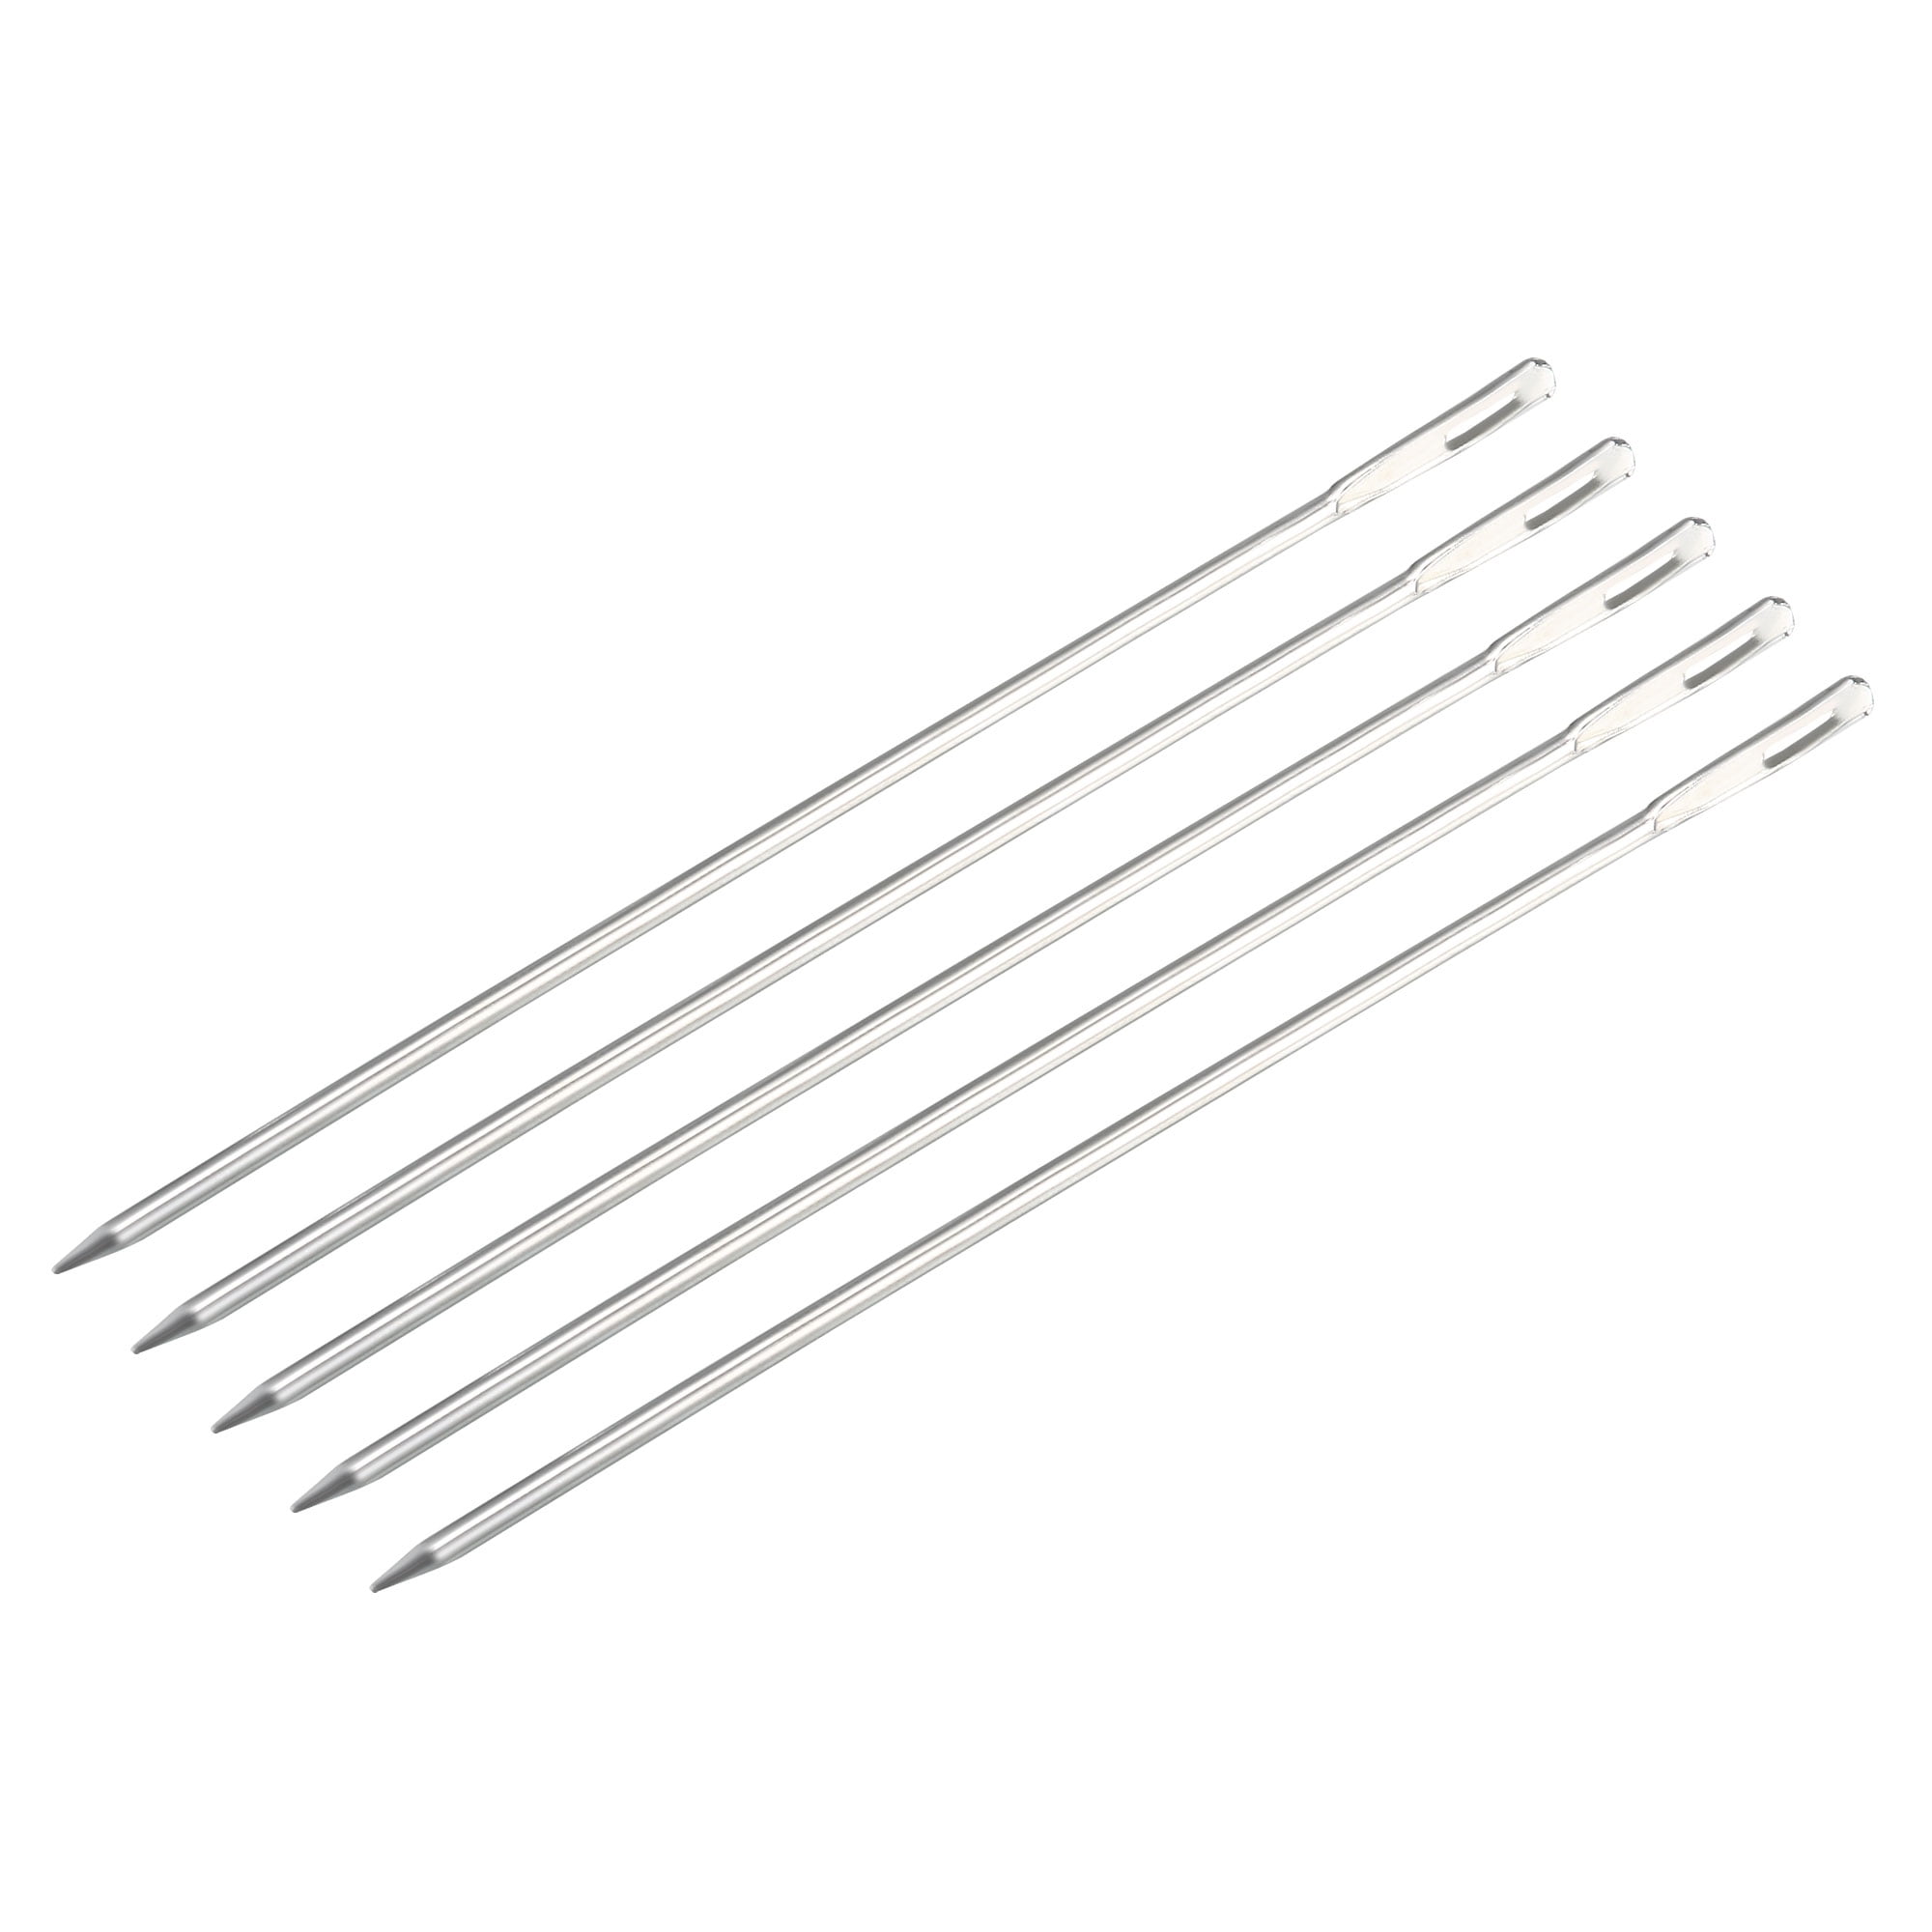 Curved special needle, suitable for sailcloth, canvas etc., length